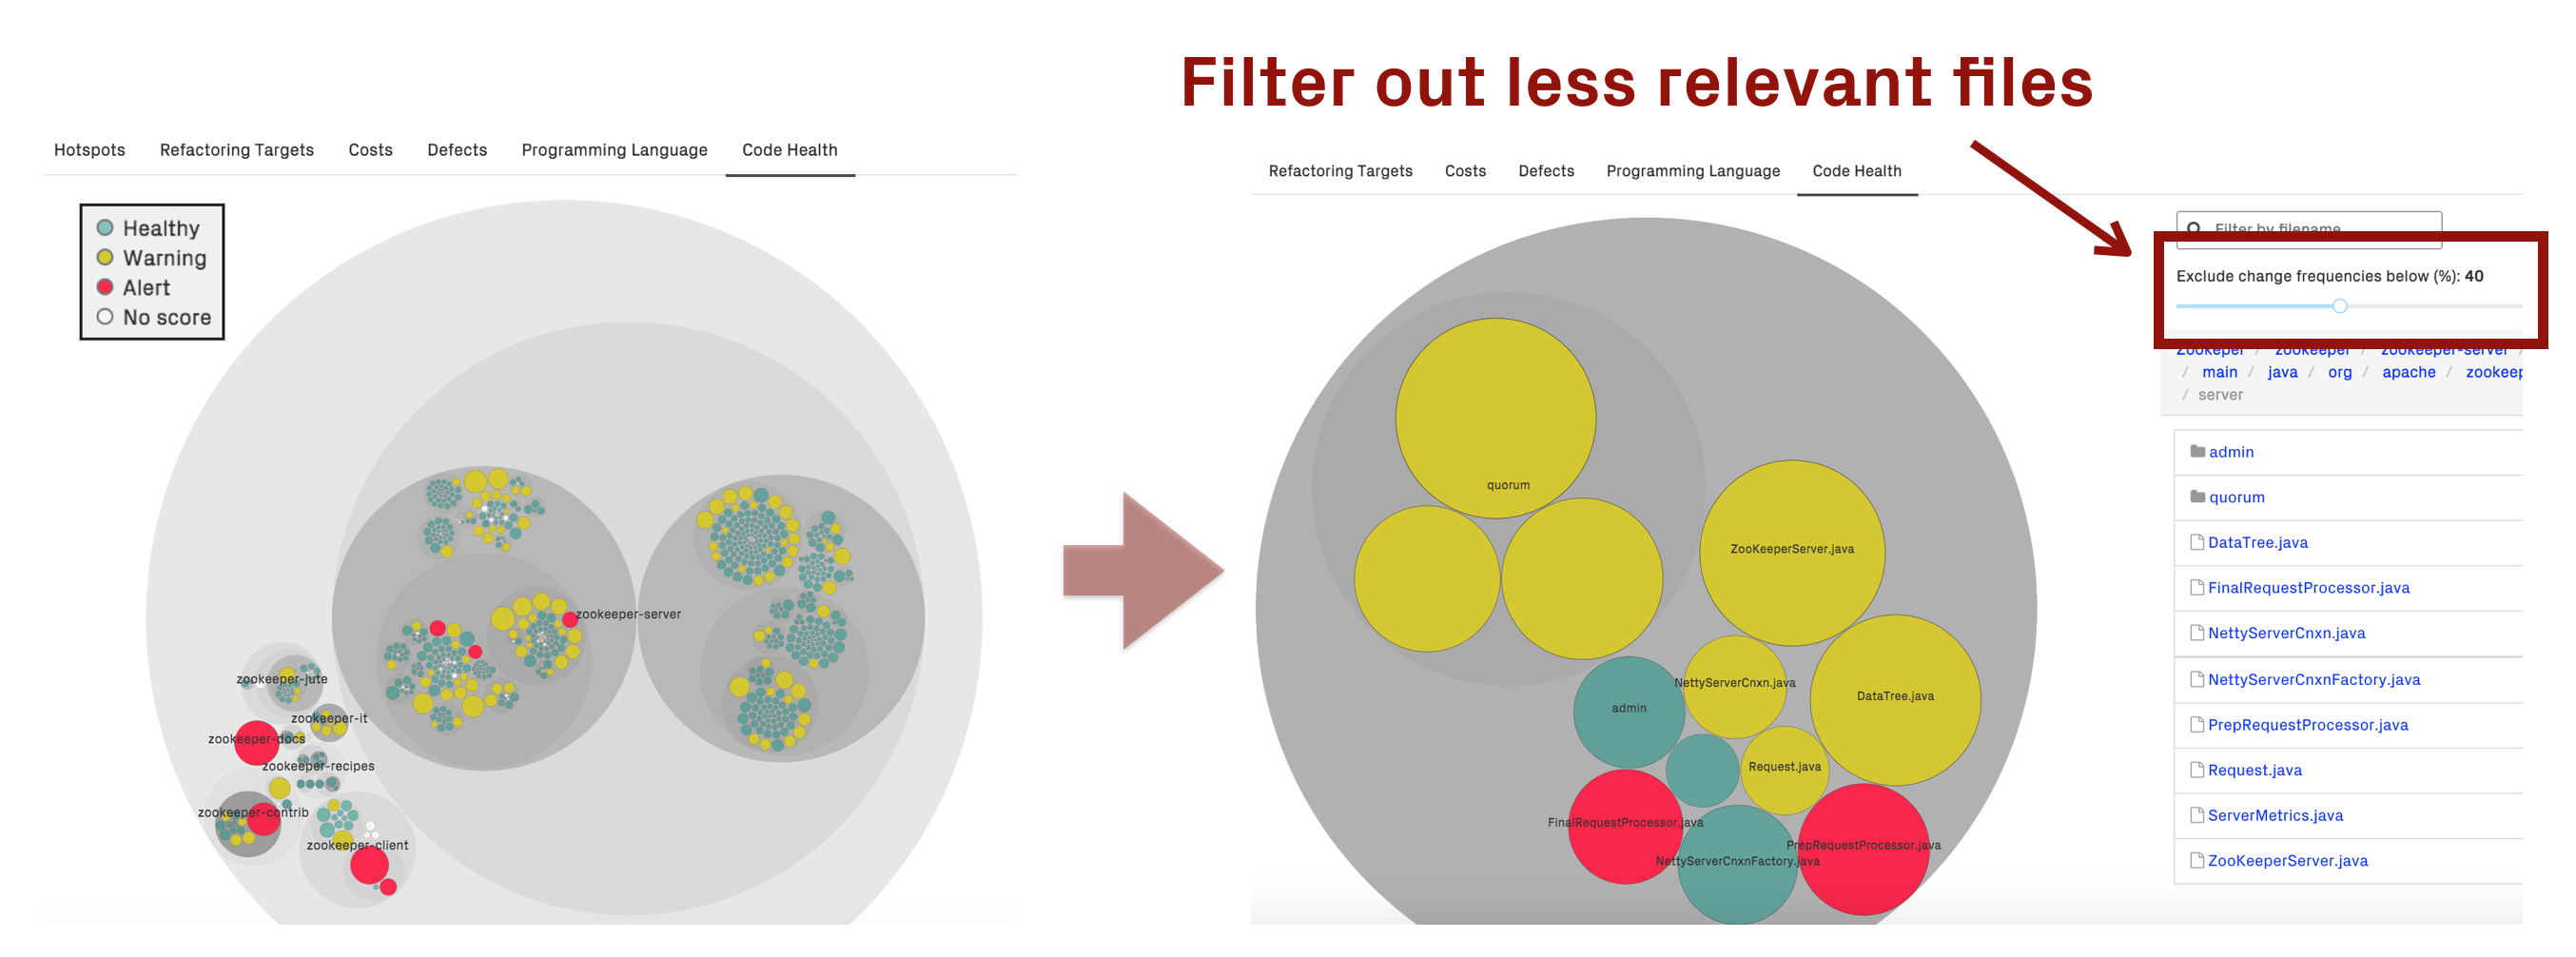 Filter the code health view based on development activity.